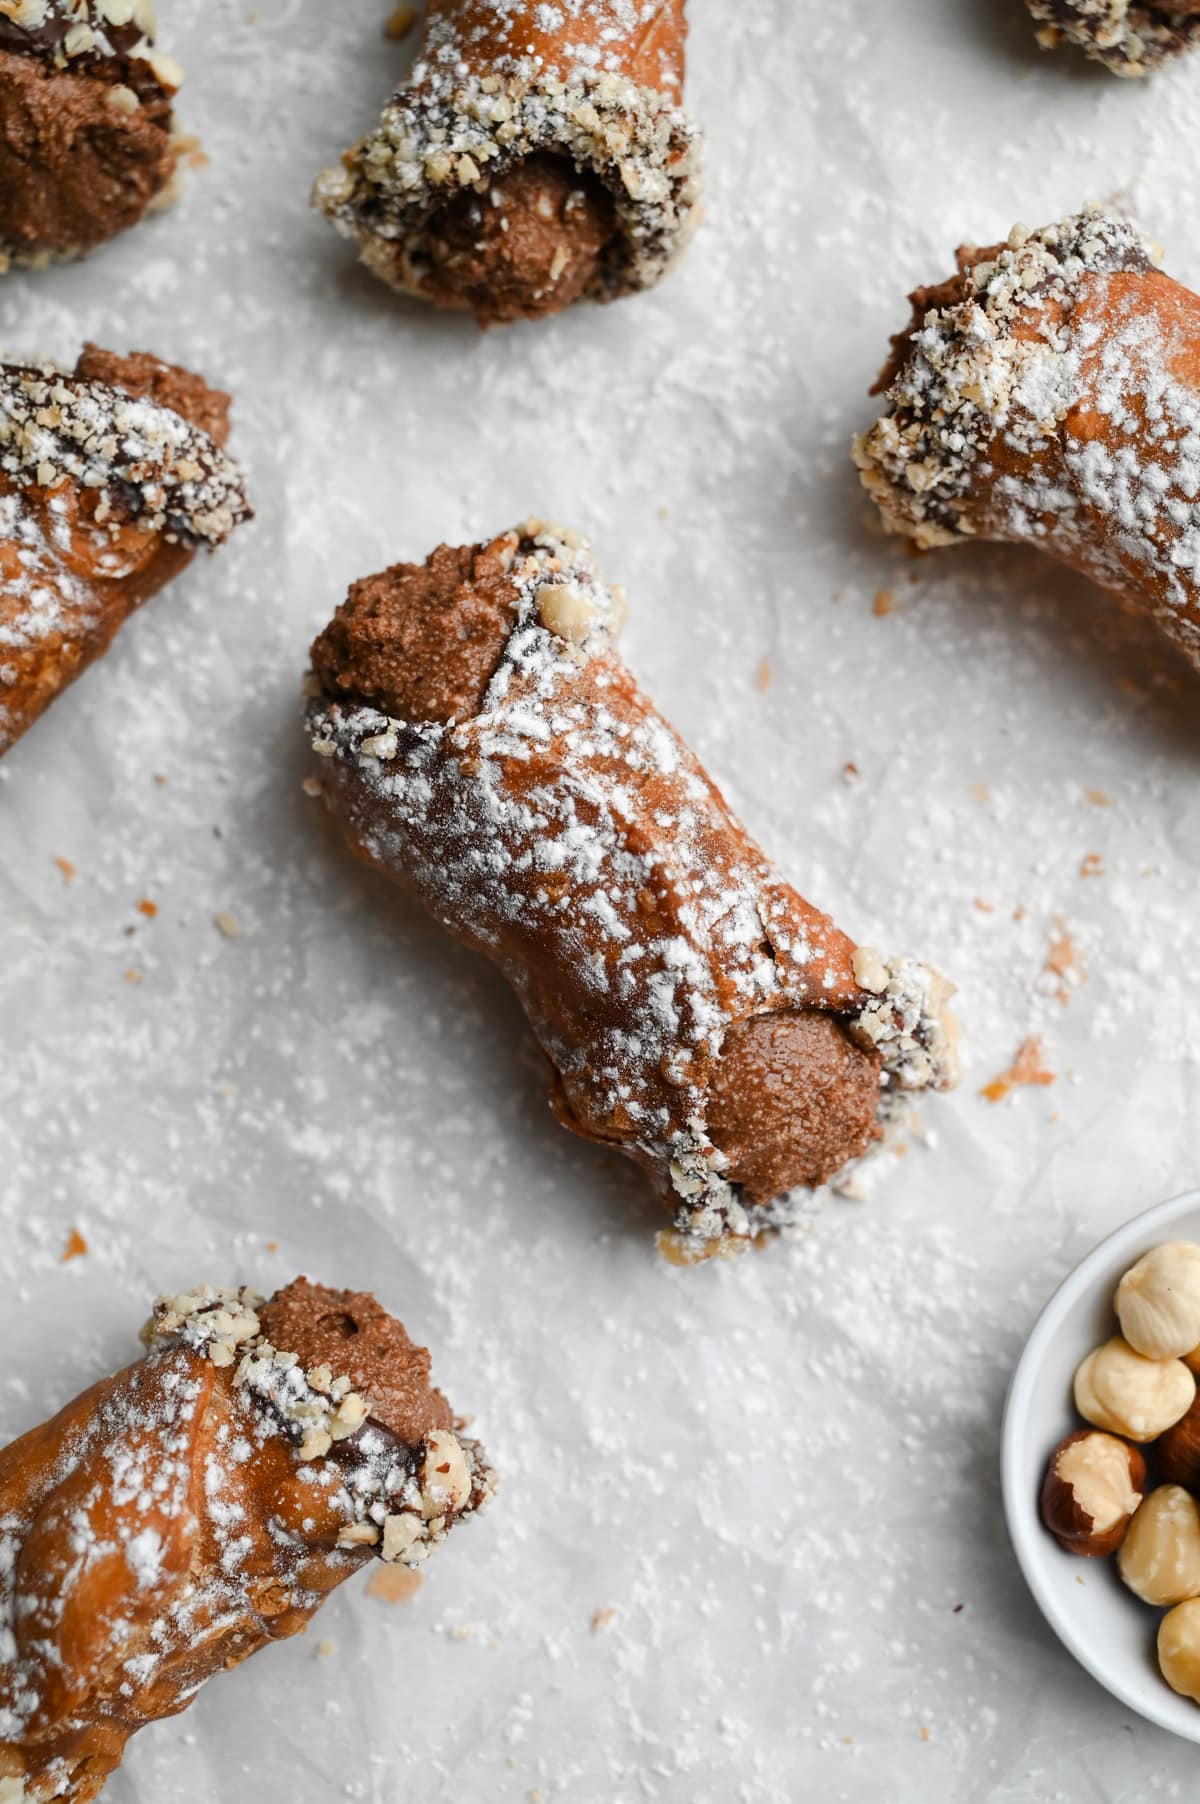 Overhead view of a group of Chocolate Hazelnut Cannoli on parchment paper.